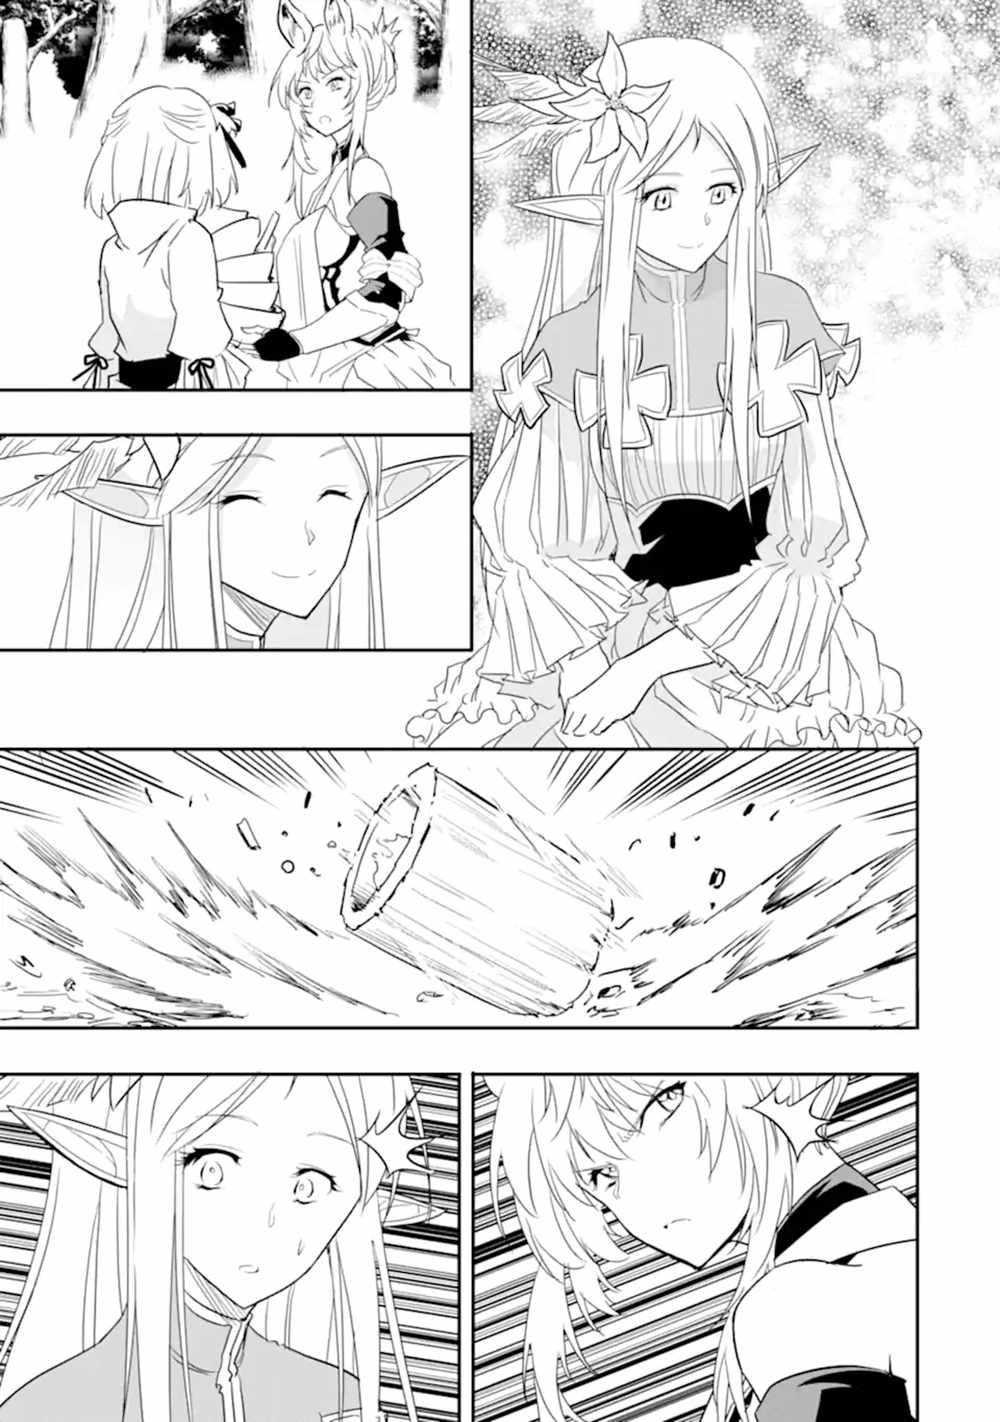 Another World Nation Archimaira: The Weakest King and his Unparalleled Army Chapter 6-2-eng-li - Page 11